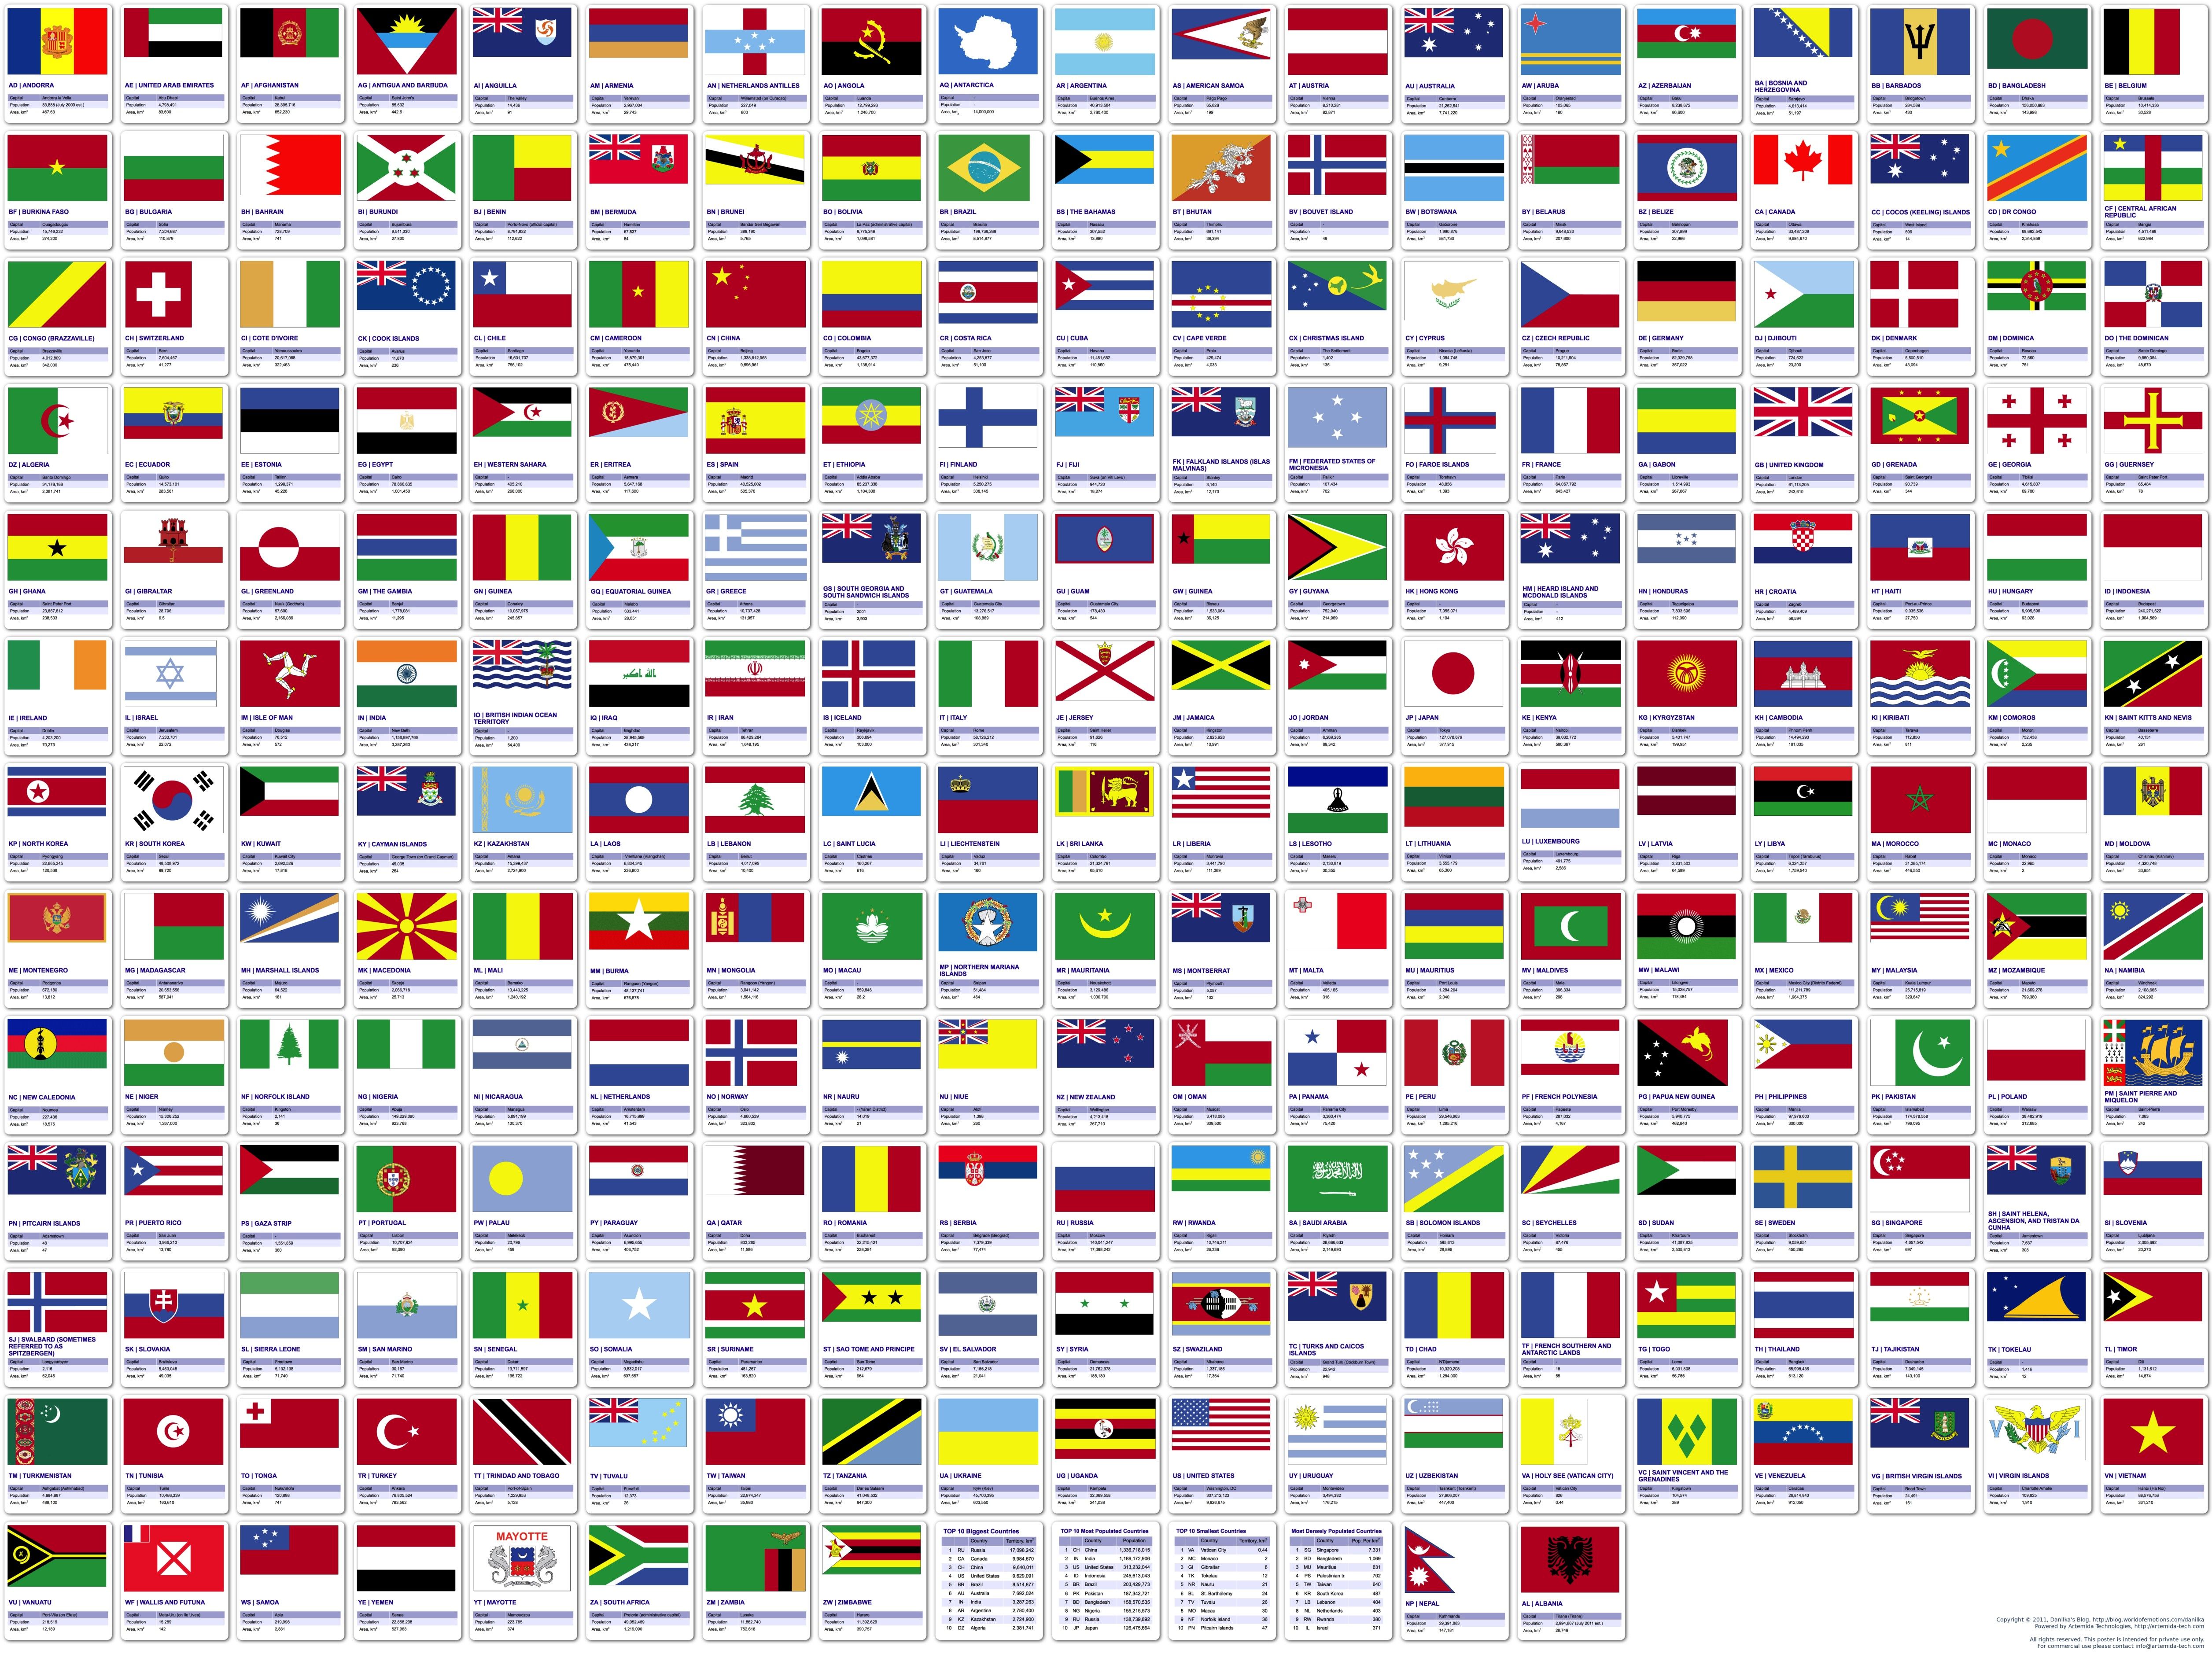 5024x3757px 3012.54 KB World Flags